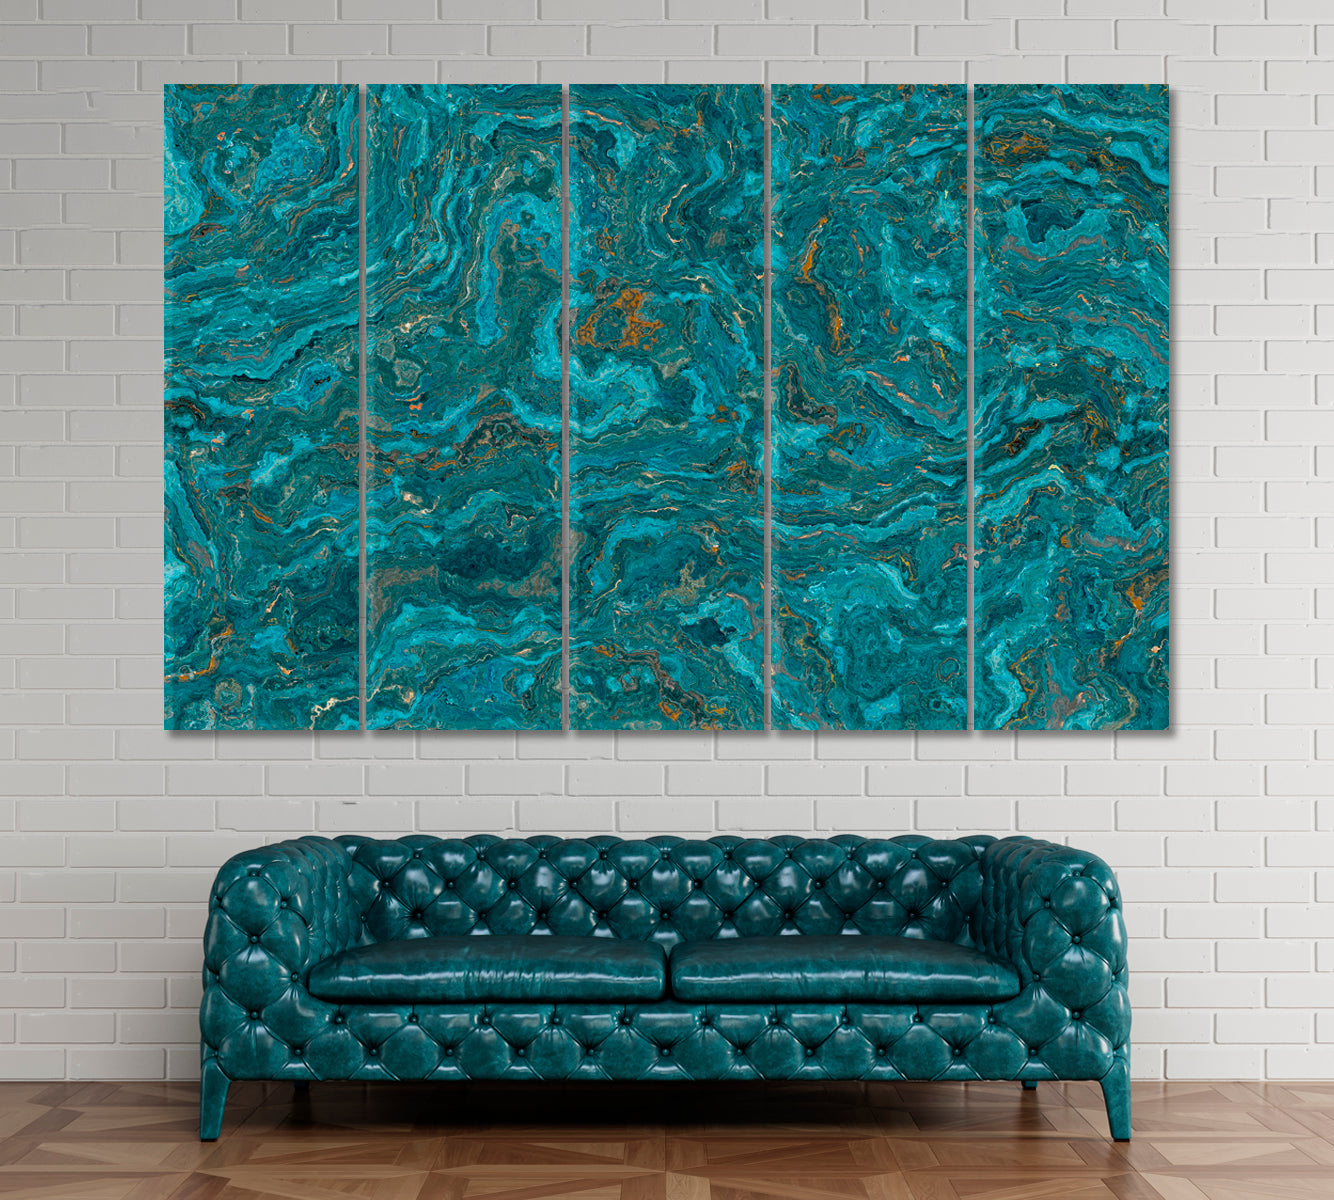 Luxury Curly Onyx with Golden Veins Canvas Print ArtLexy 5 Panels 36"x24" inches 